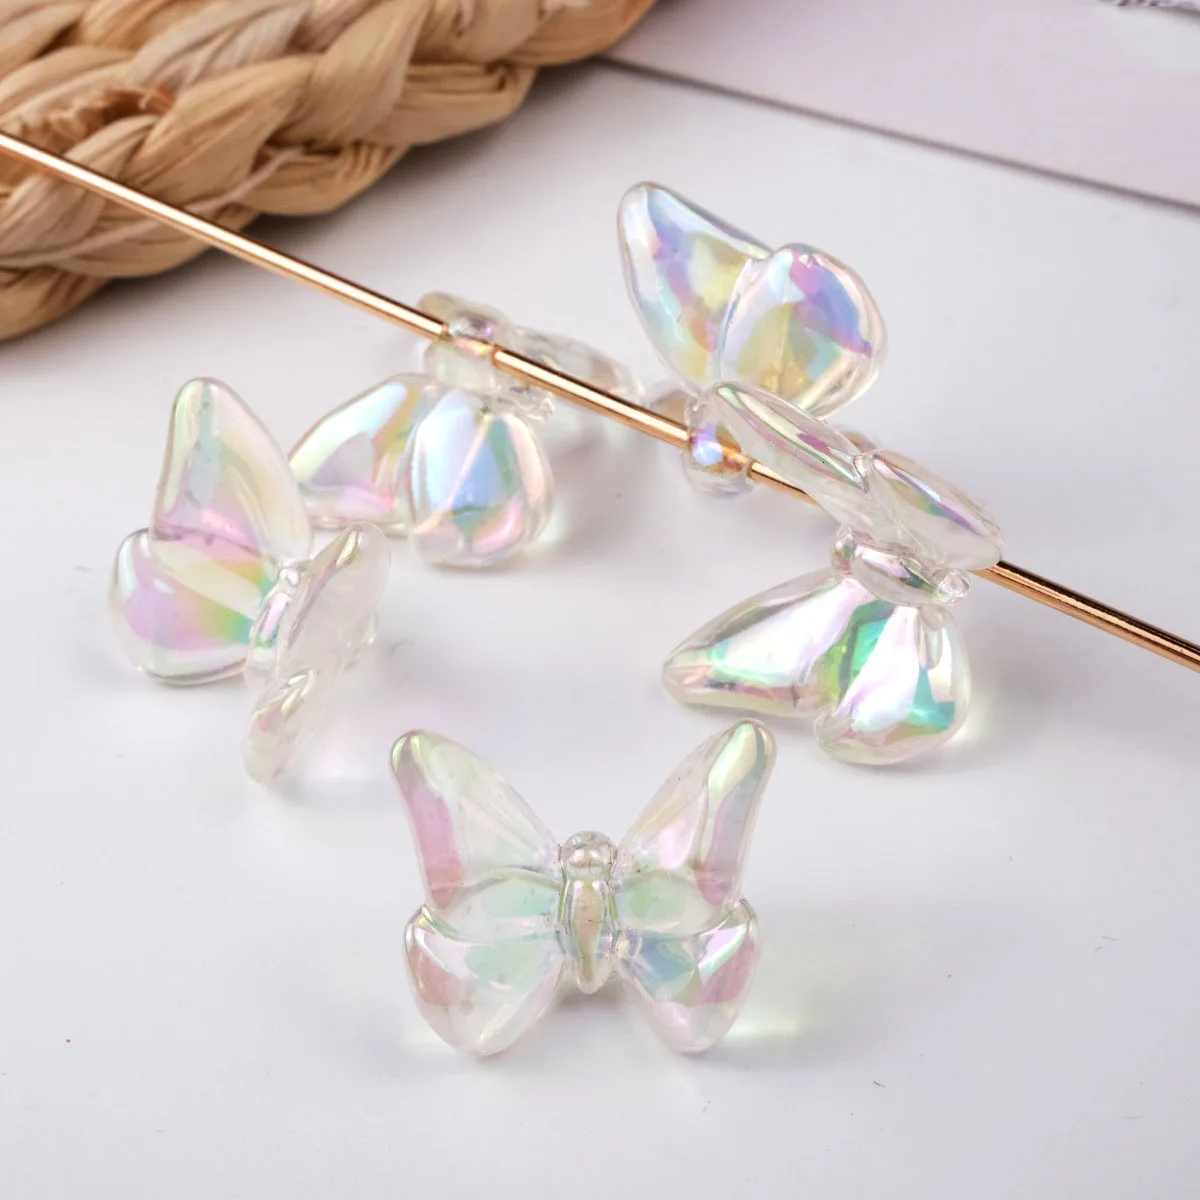 Butterfly Beads - 14mm AB Translucent Iridescent Color Little Butterfly  Shaped Resin or Acrylic Beads - 100 pc set